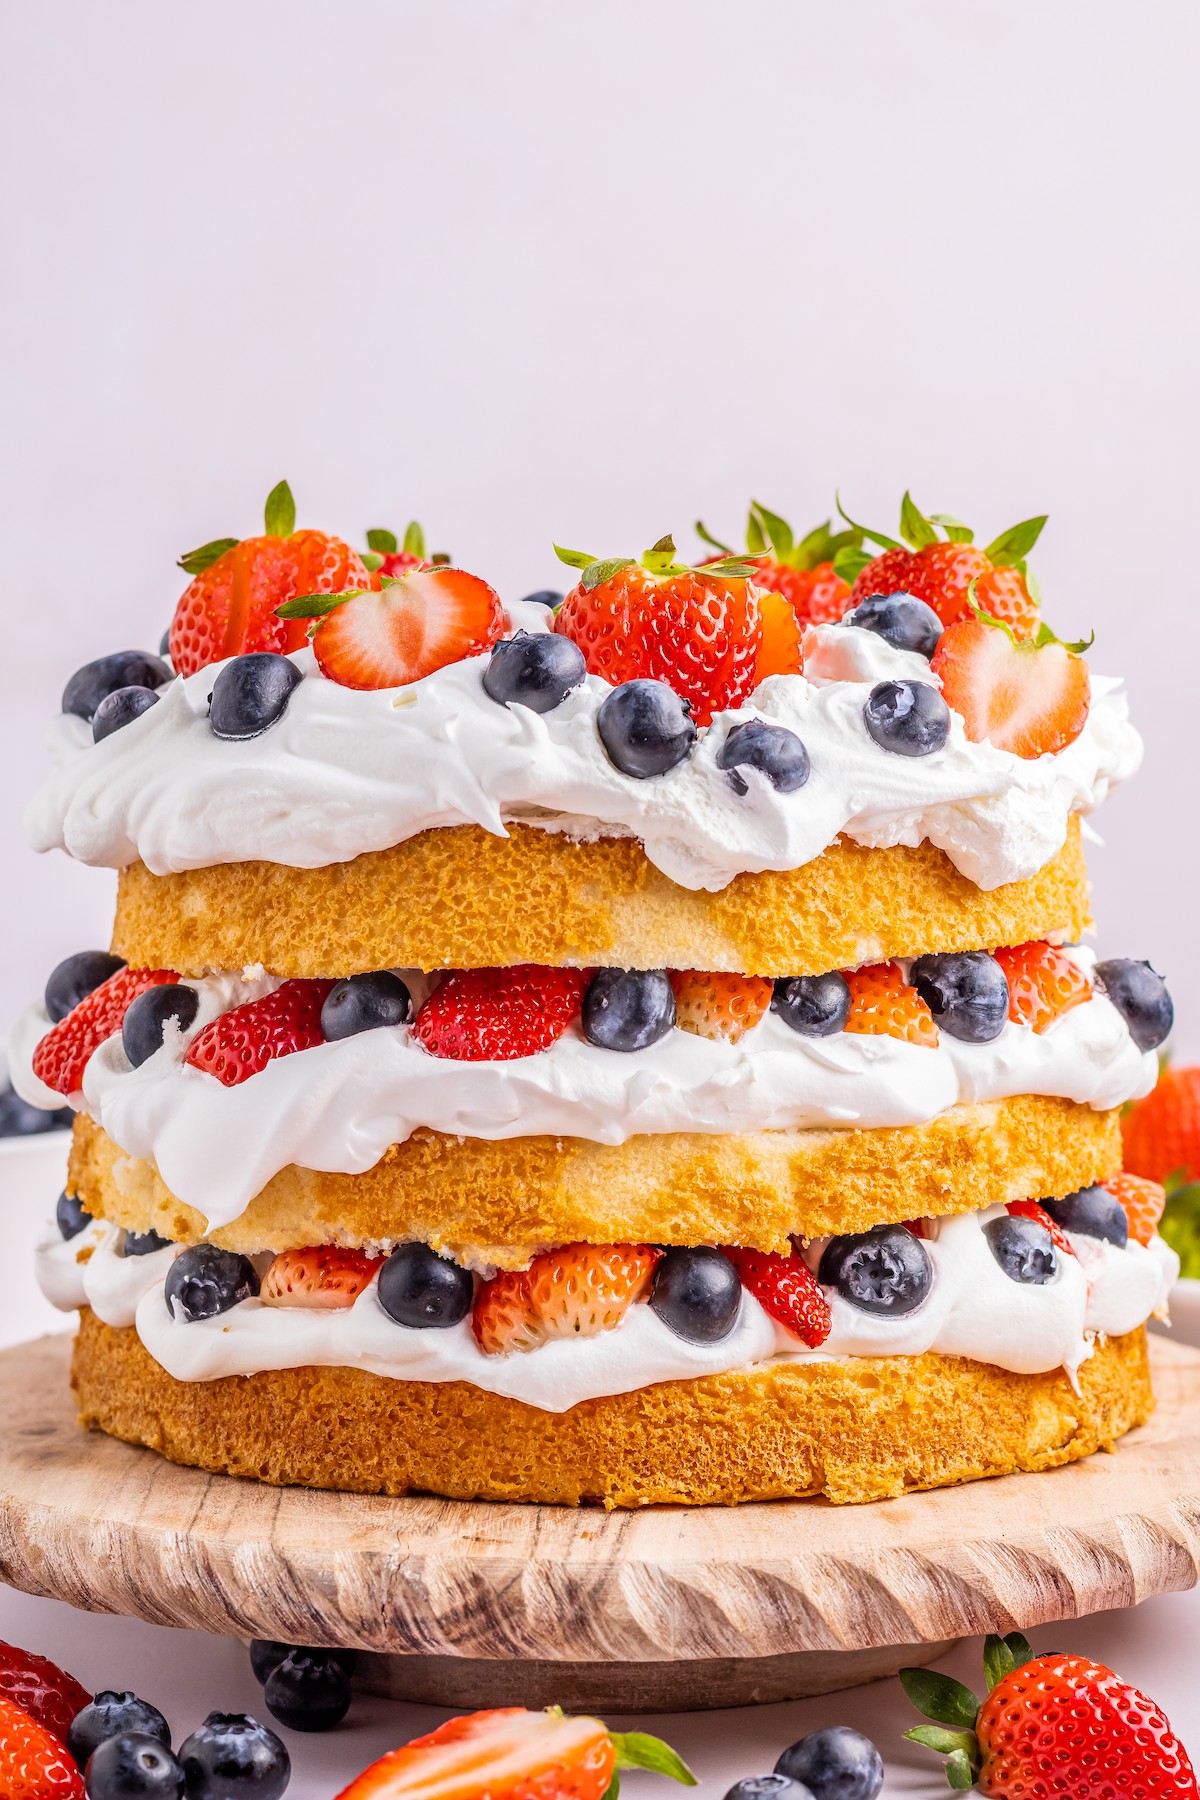 A layered red-white-and-blue cake with whipped cream and berries.